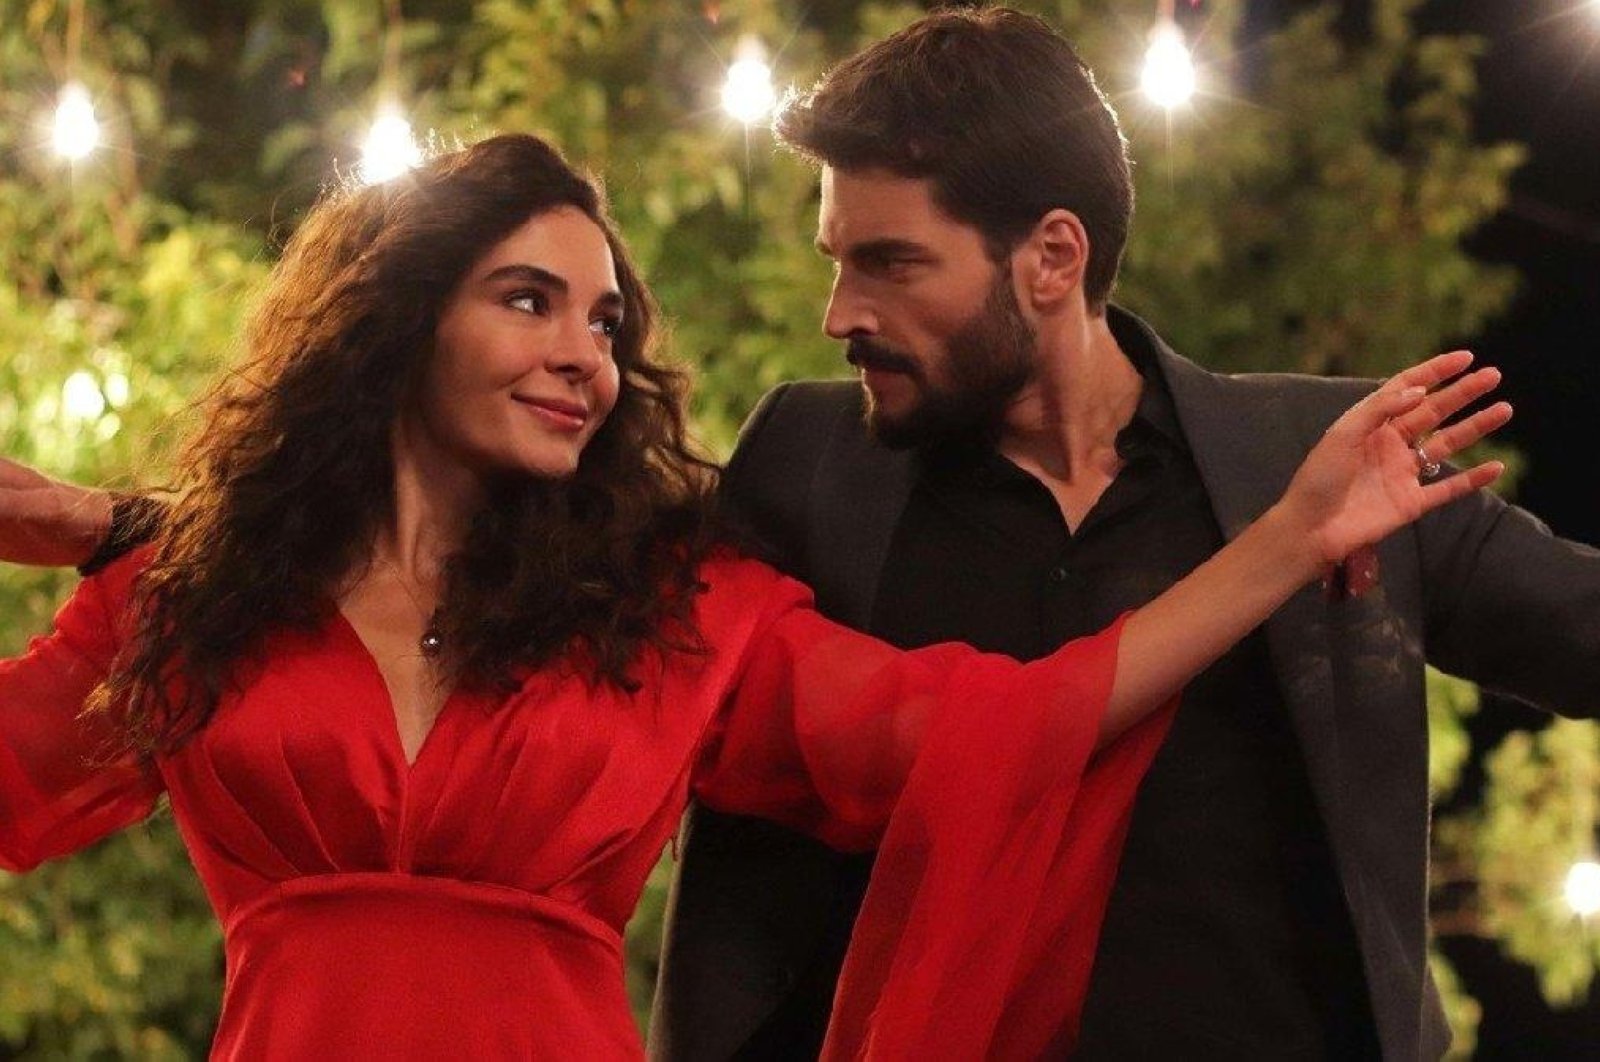 Turkish Series Hercai More Than Just Tv Show Says American Psychologist Daily Sabah